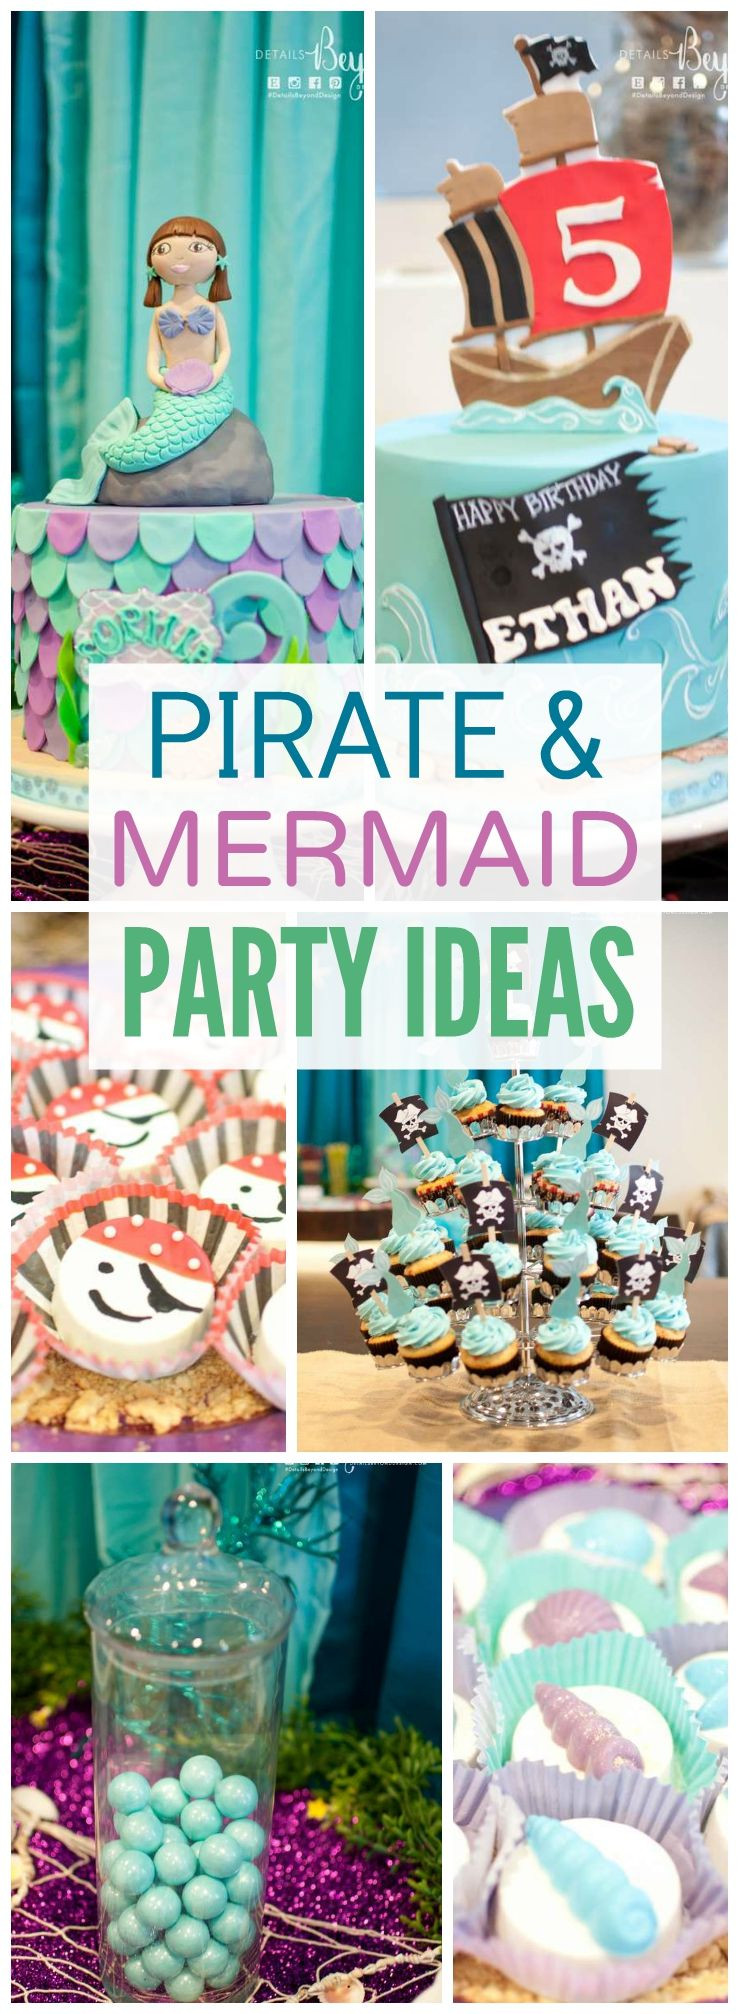 Boy And Girl Birthday Party Themes
 Pirate & Mermaid Under the Sea Birthday "Ethan